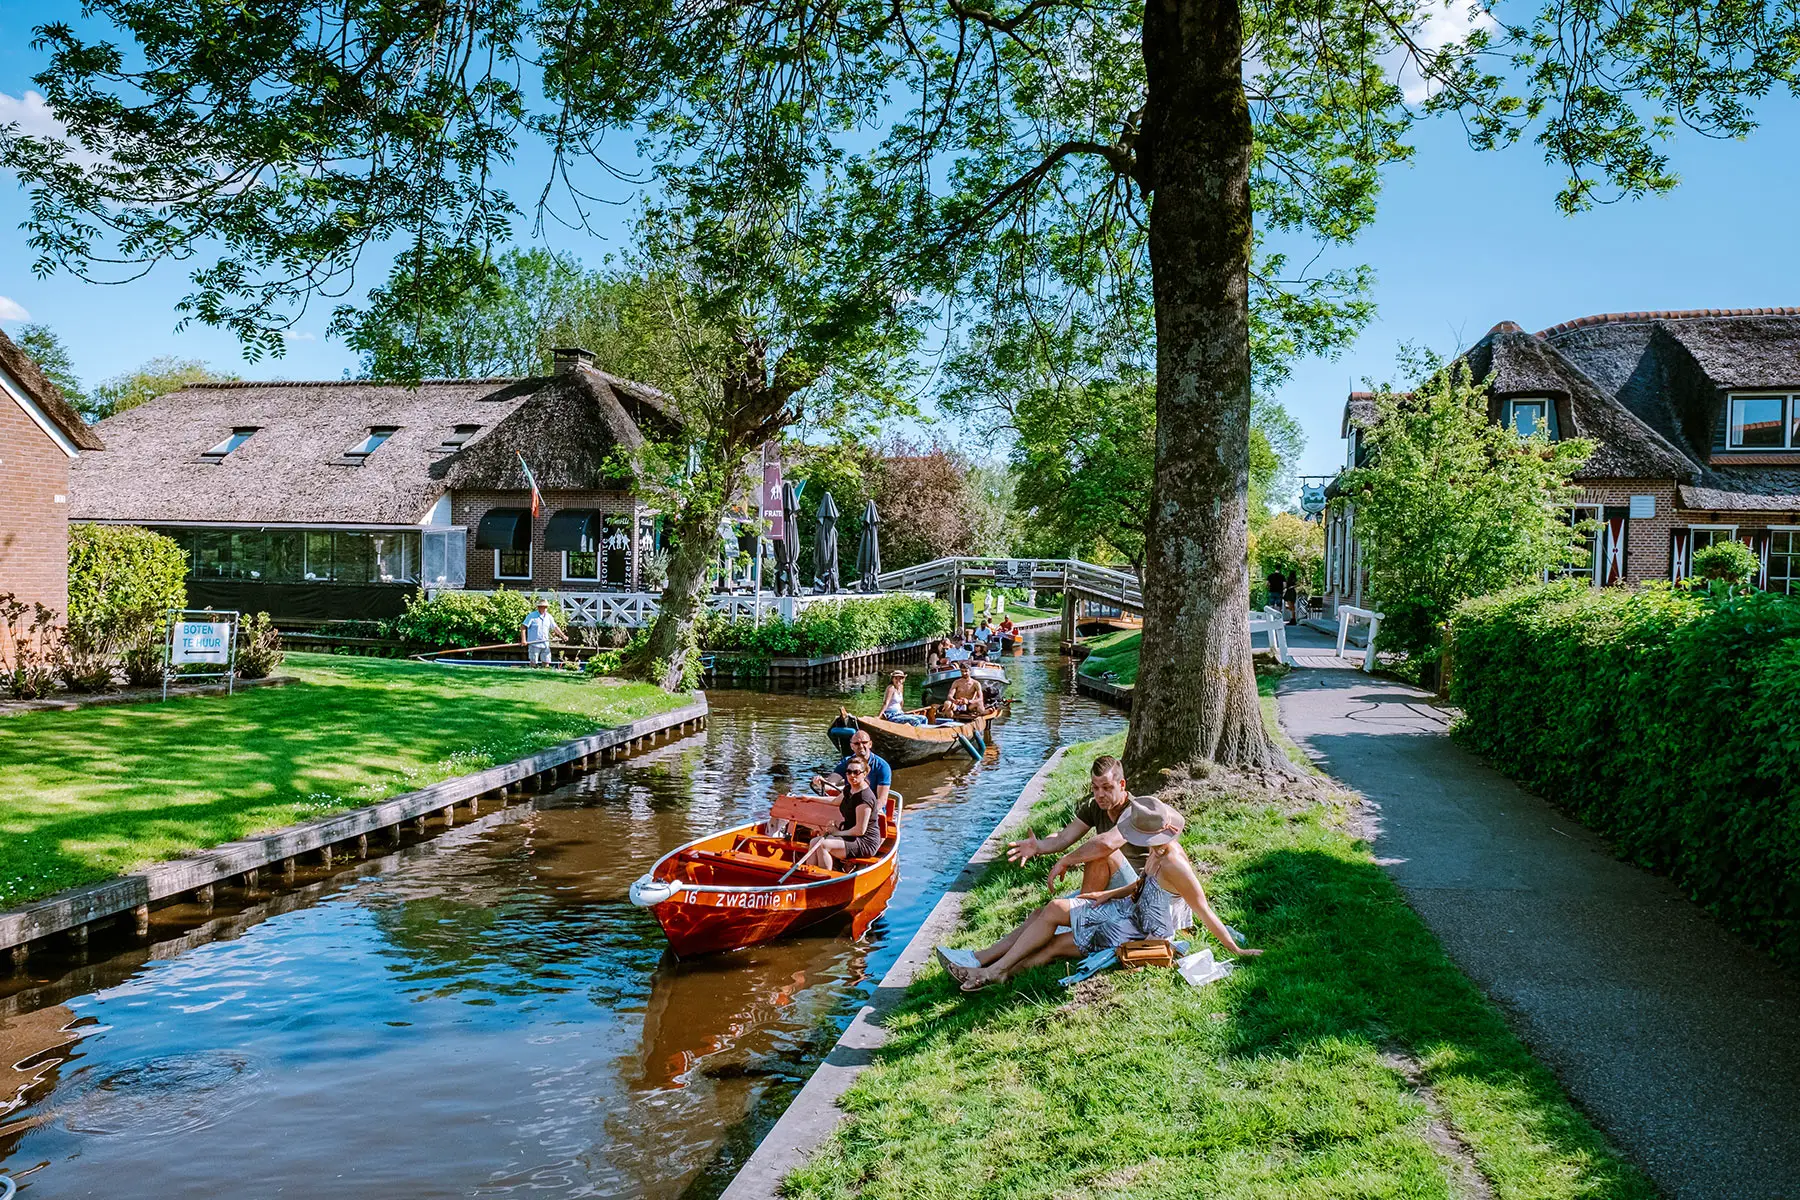 People in boats on a Dutch canal